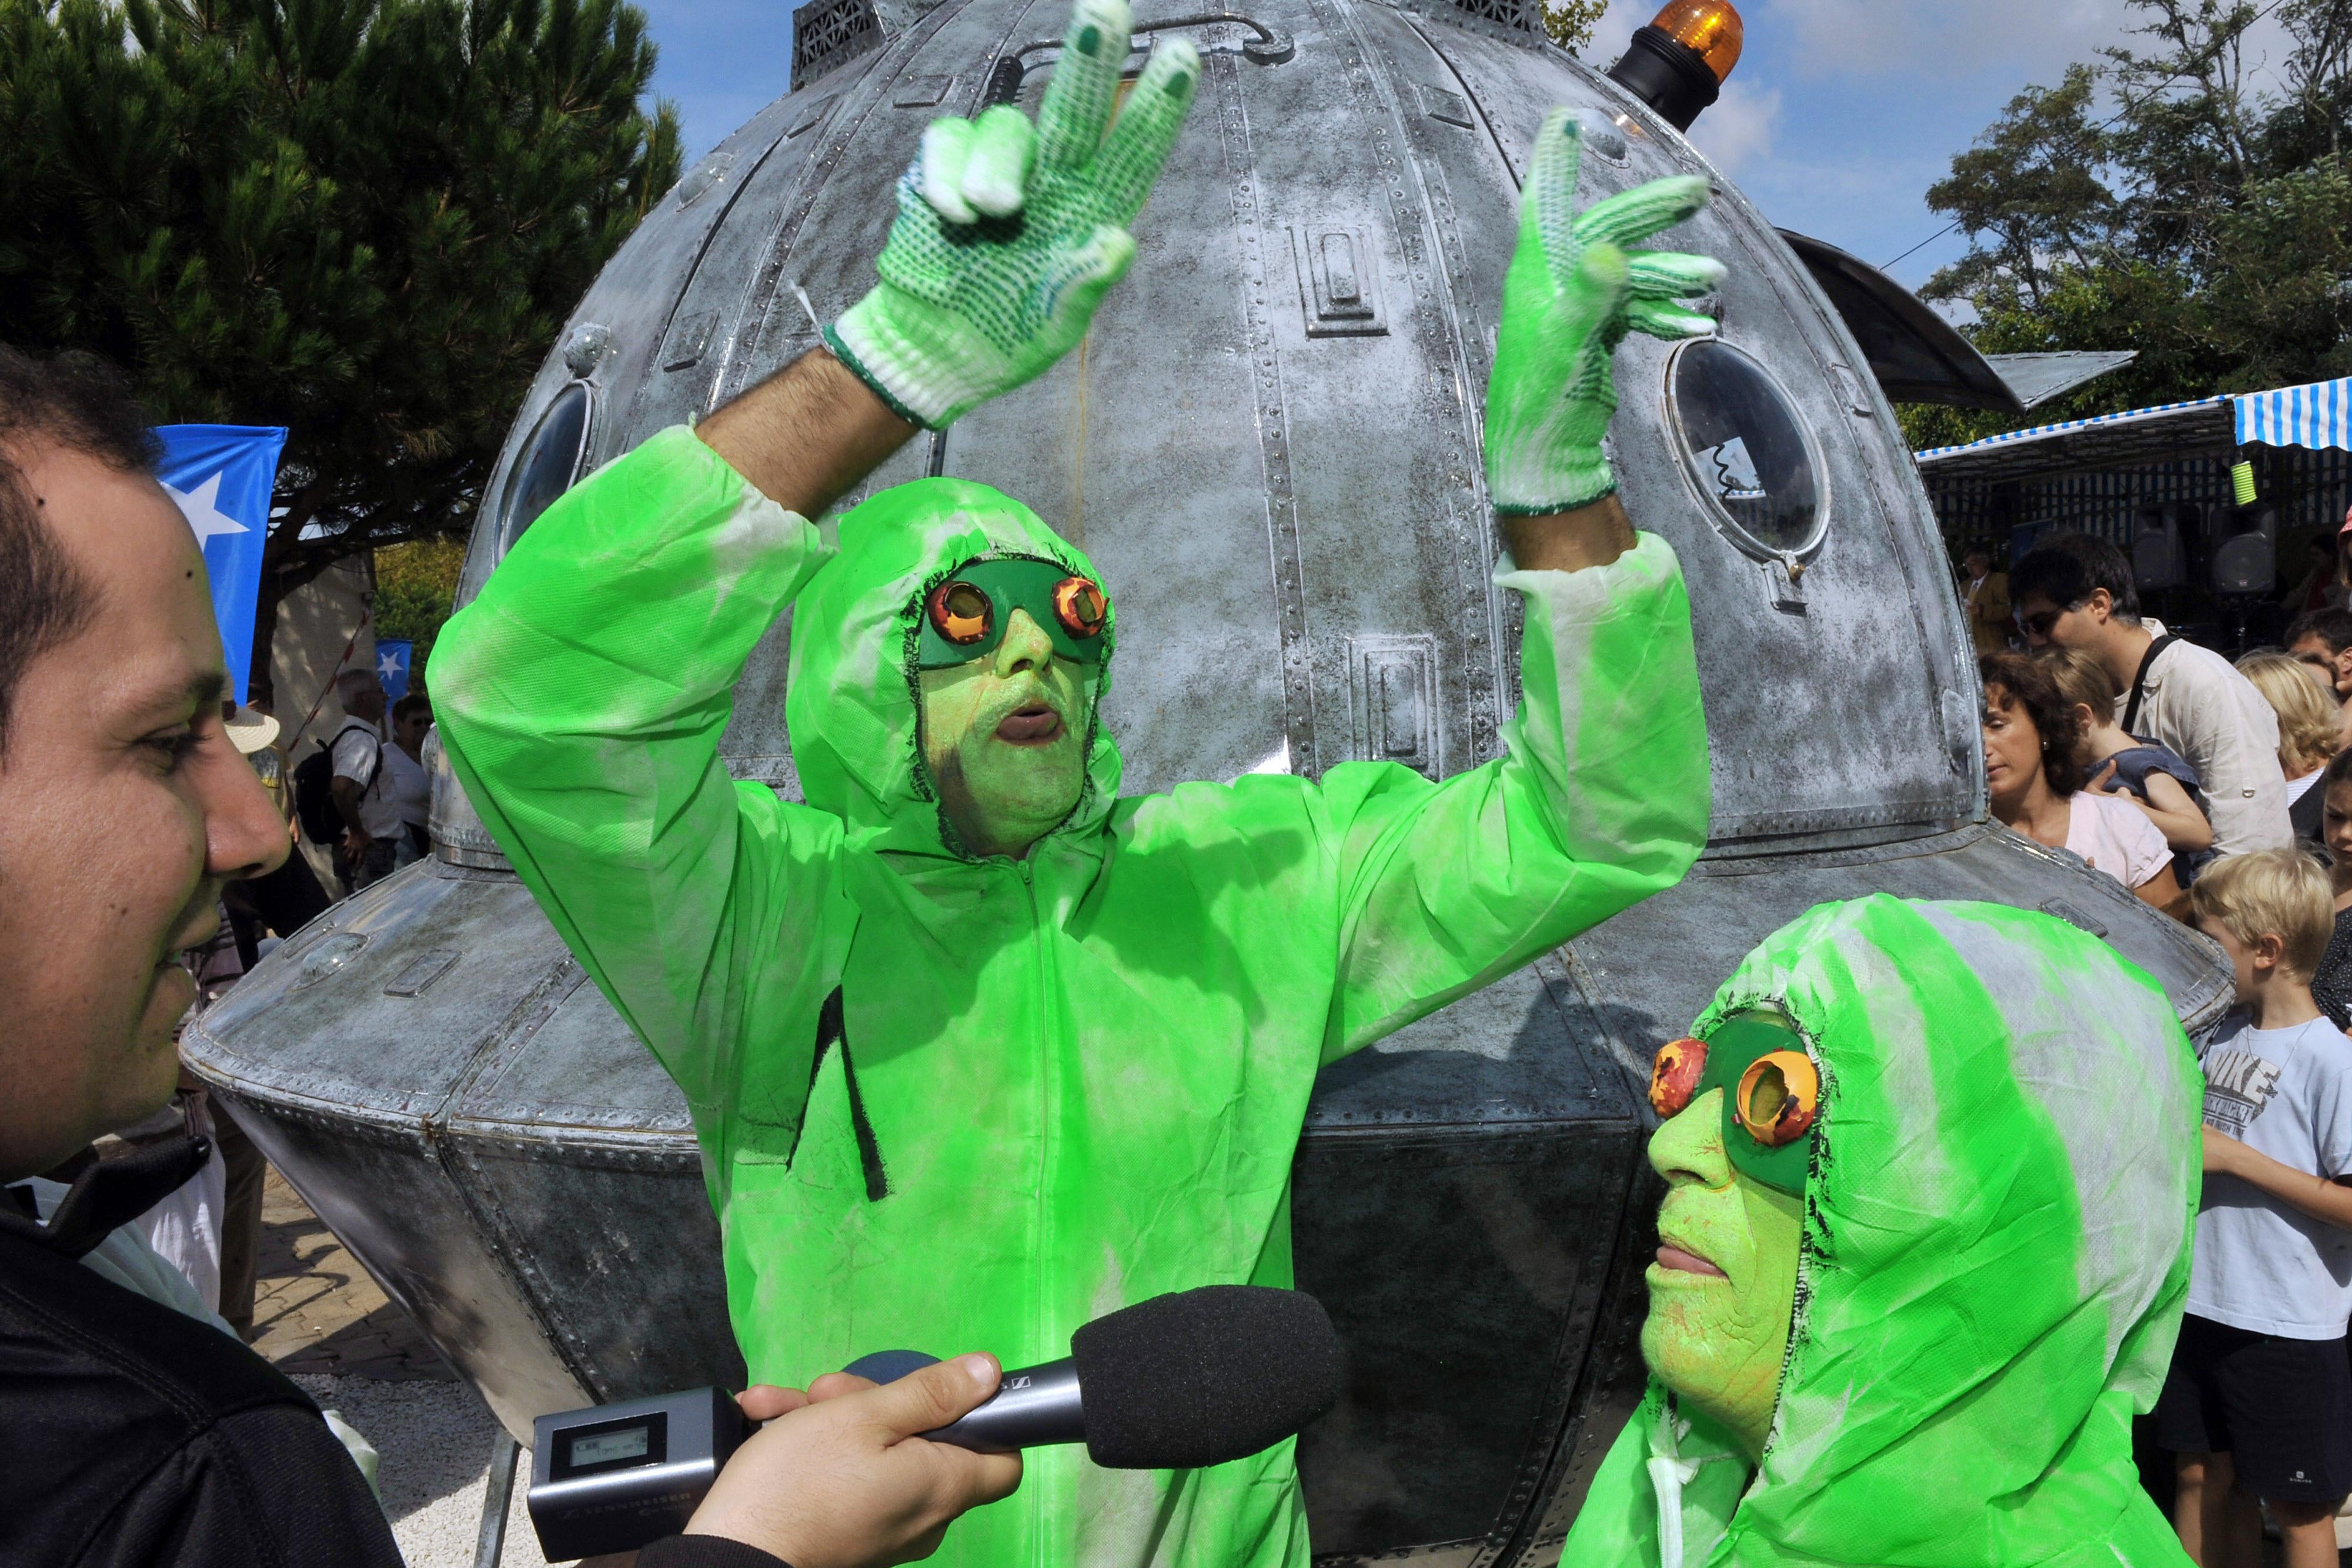 Two people in green outfits and face paint in front of a fake flying saucer